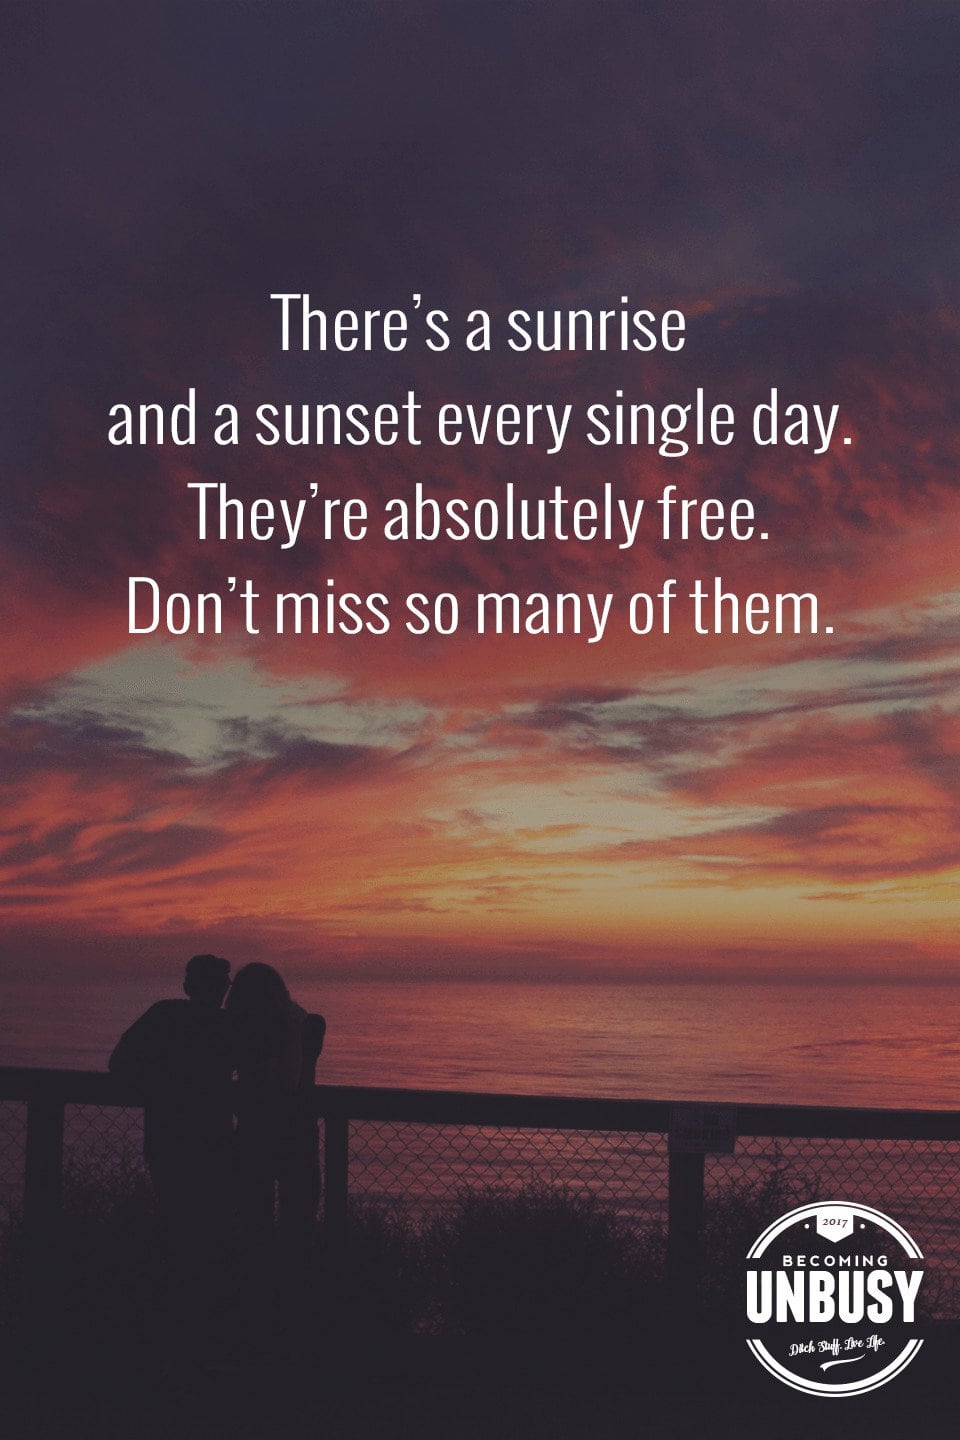 The following winter self-care quote over a photo of a couple at a fence watching a sunset, "There's a sunset every single day. The show is absolutely free. Don't miss so many of them."